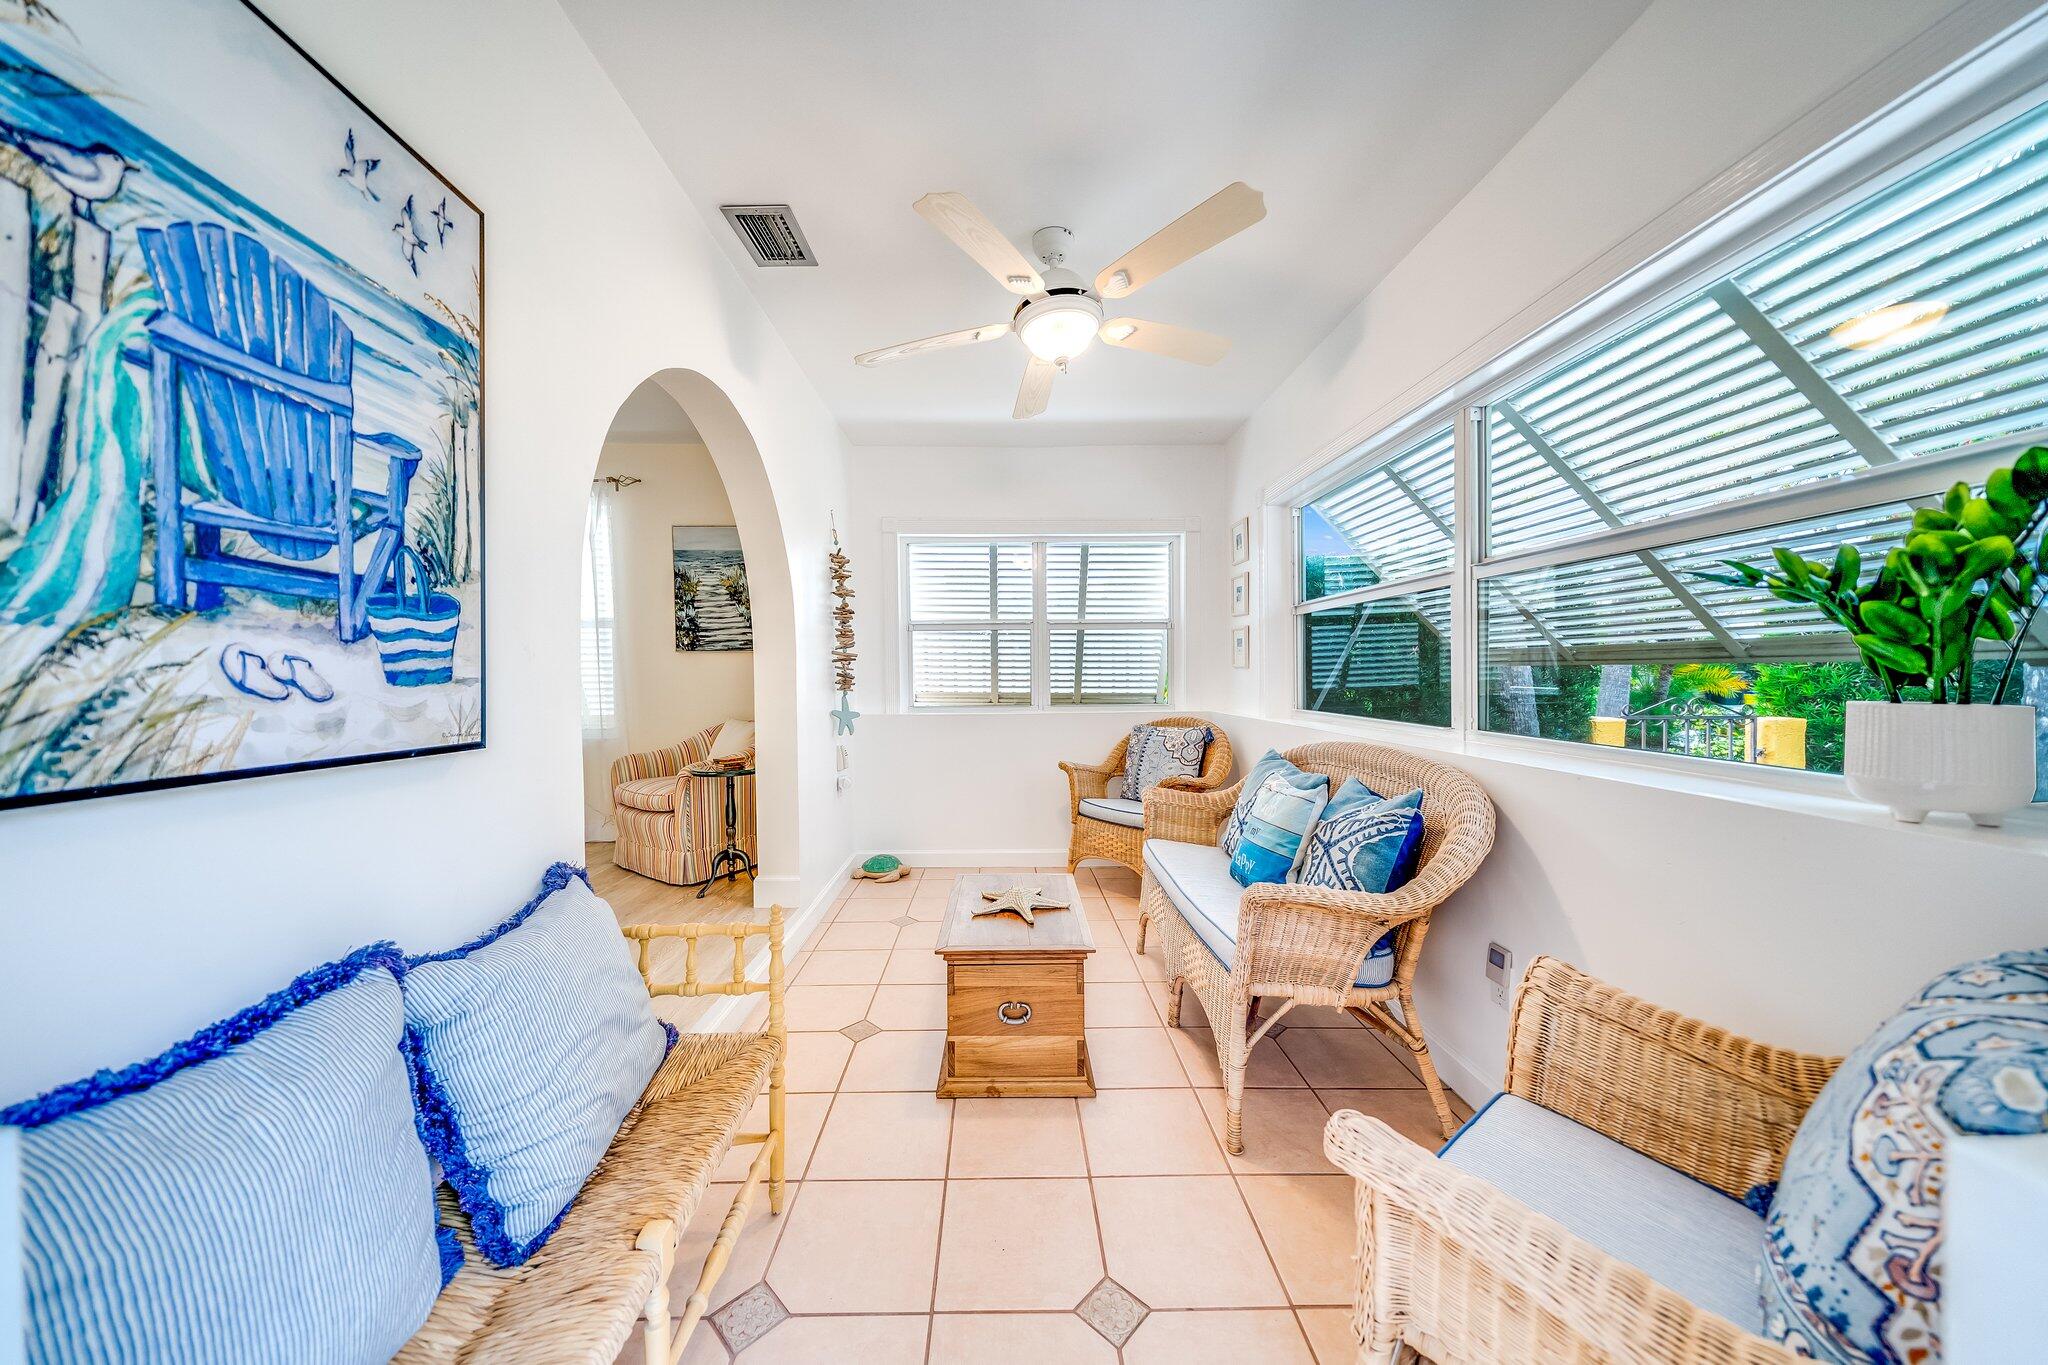 Property for Sale at 205 18th Avenue Main   Cot, Lake Worth Beach, Palm Beach County, Florida - Bedrooms: 4 
Bathrooms: 3.5  - $1,280,000